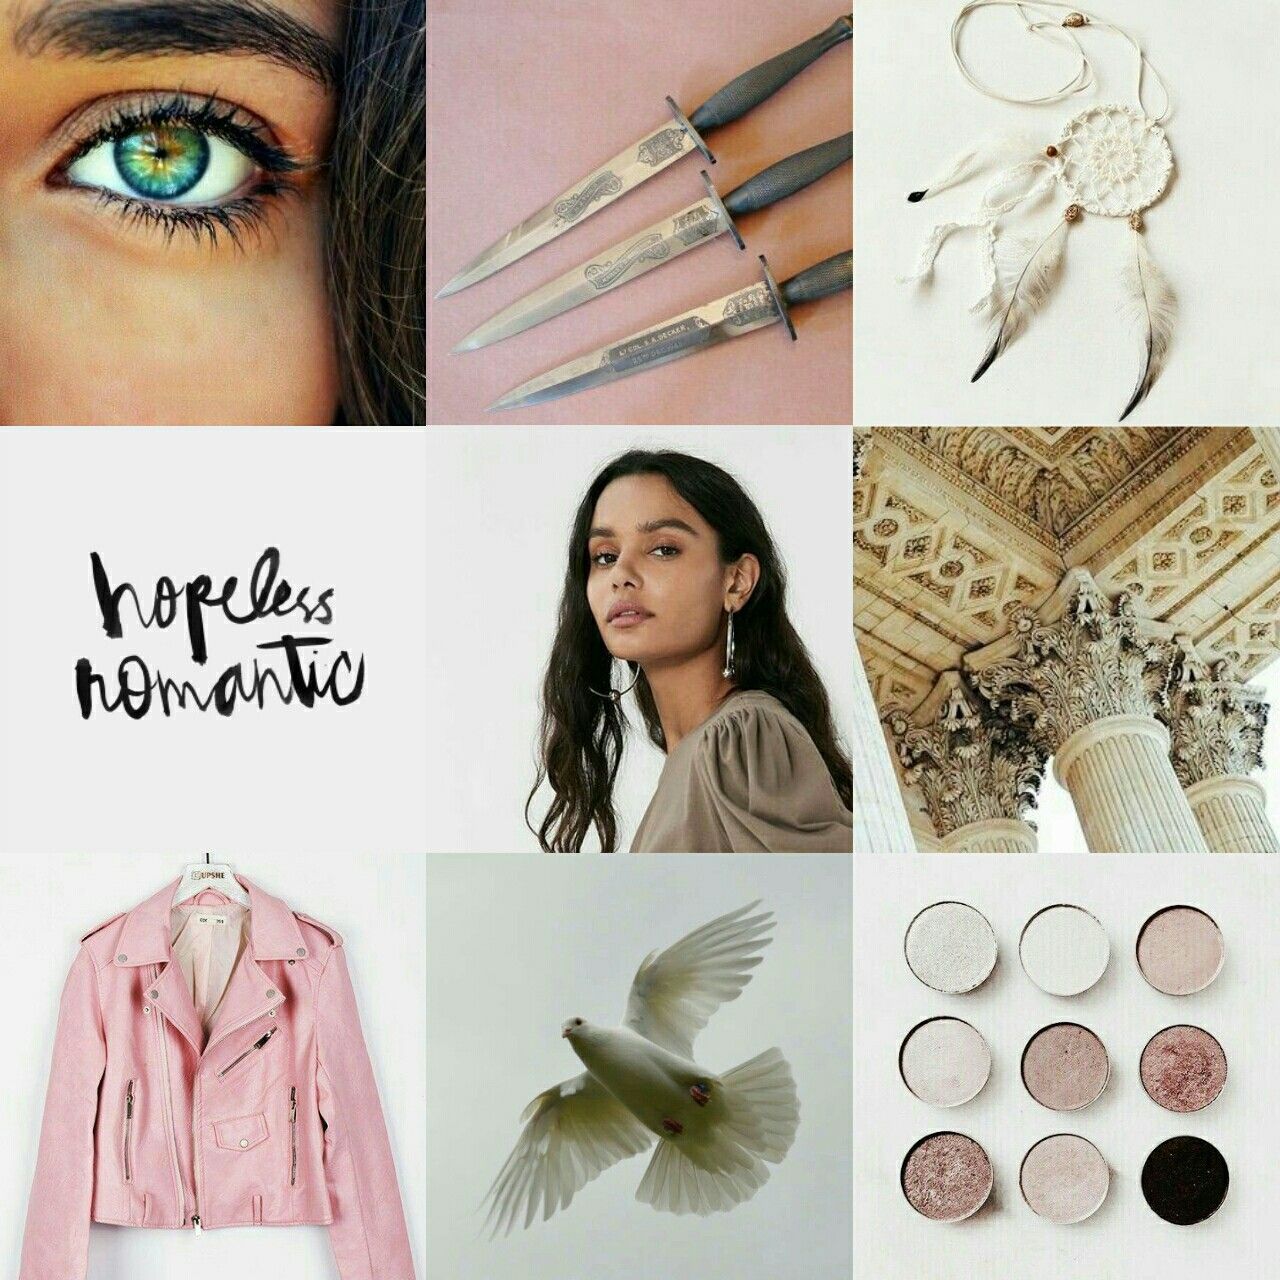 Percy Jackson characters aesthetics Piper McLean II